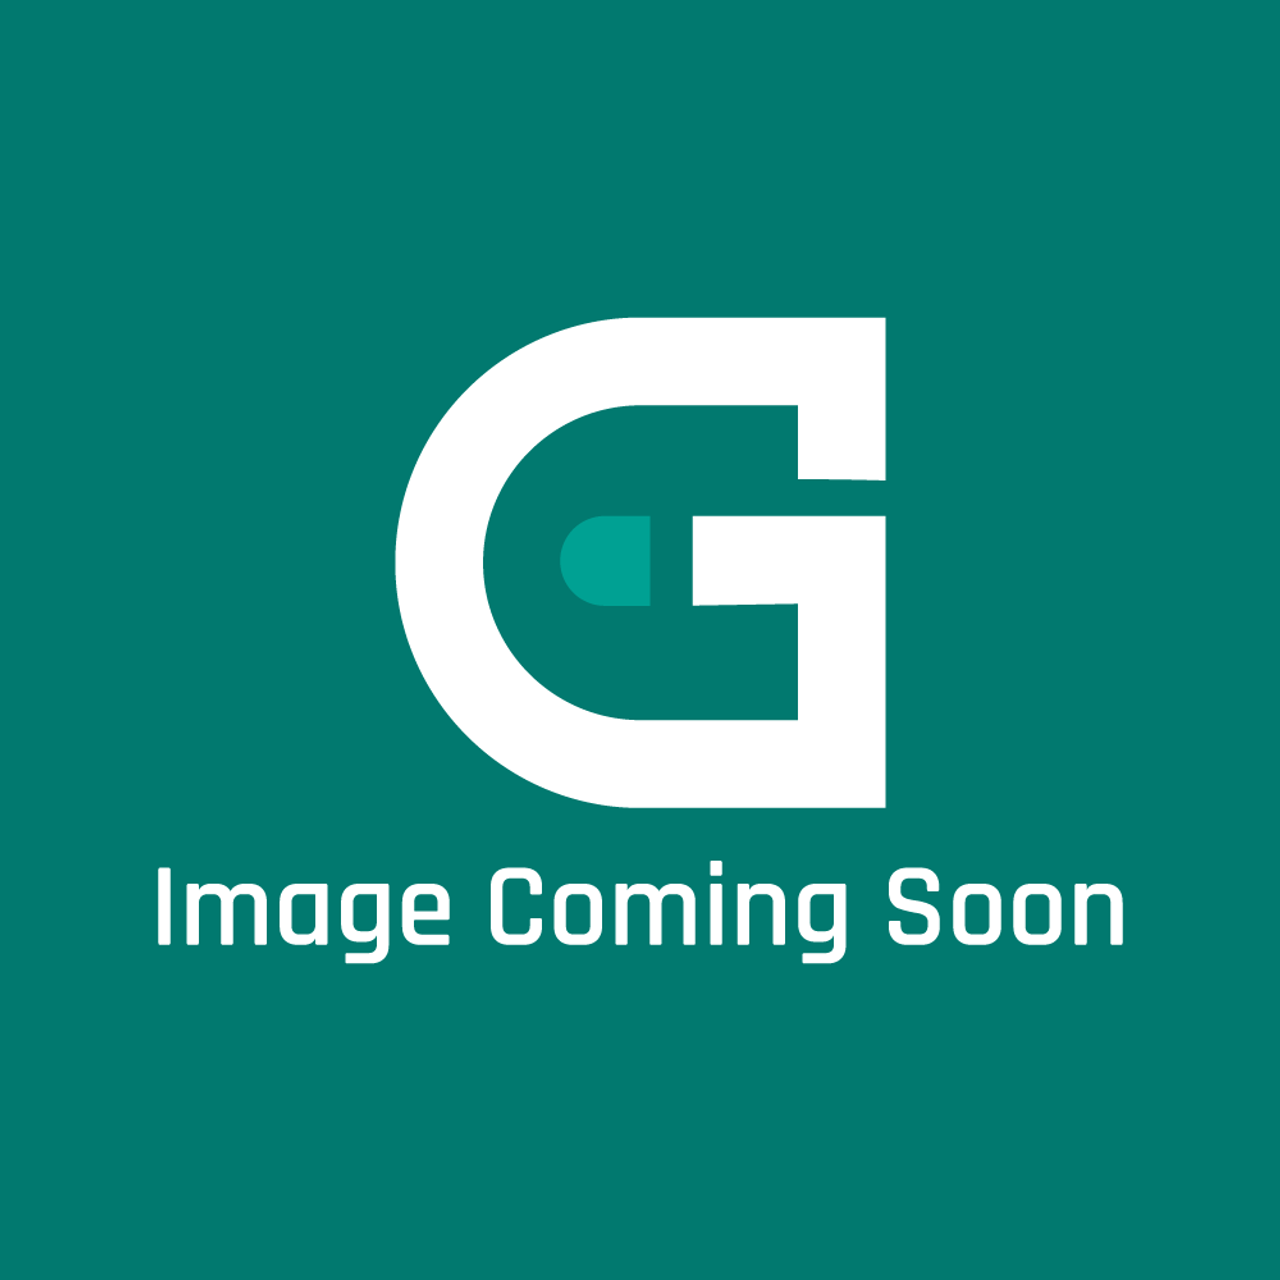 Frigidaire - Electrolux 134638525 Panel - Image Coming Soon!